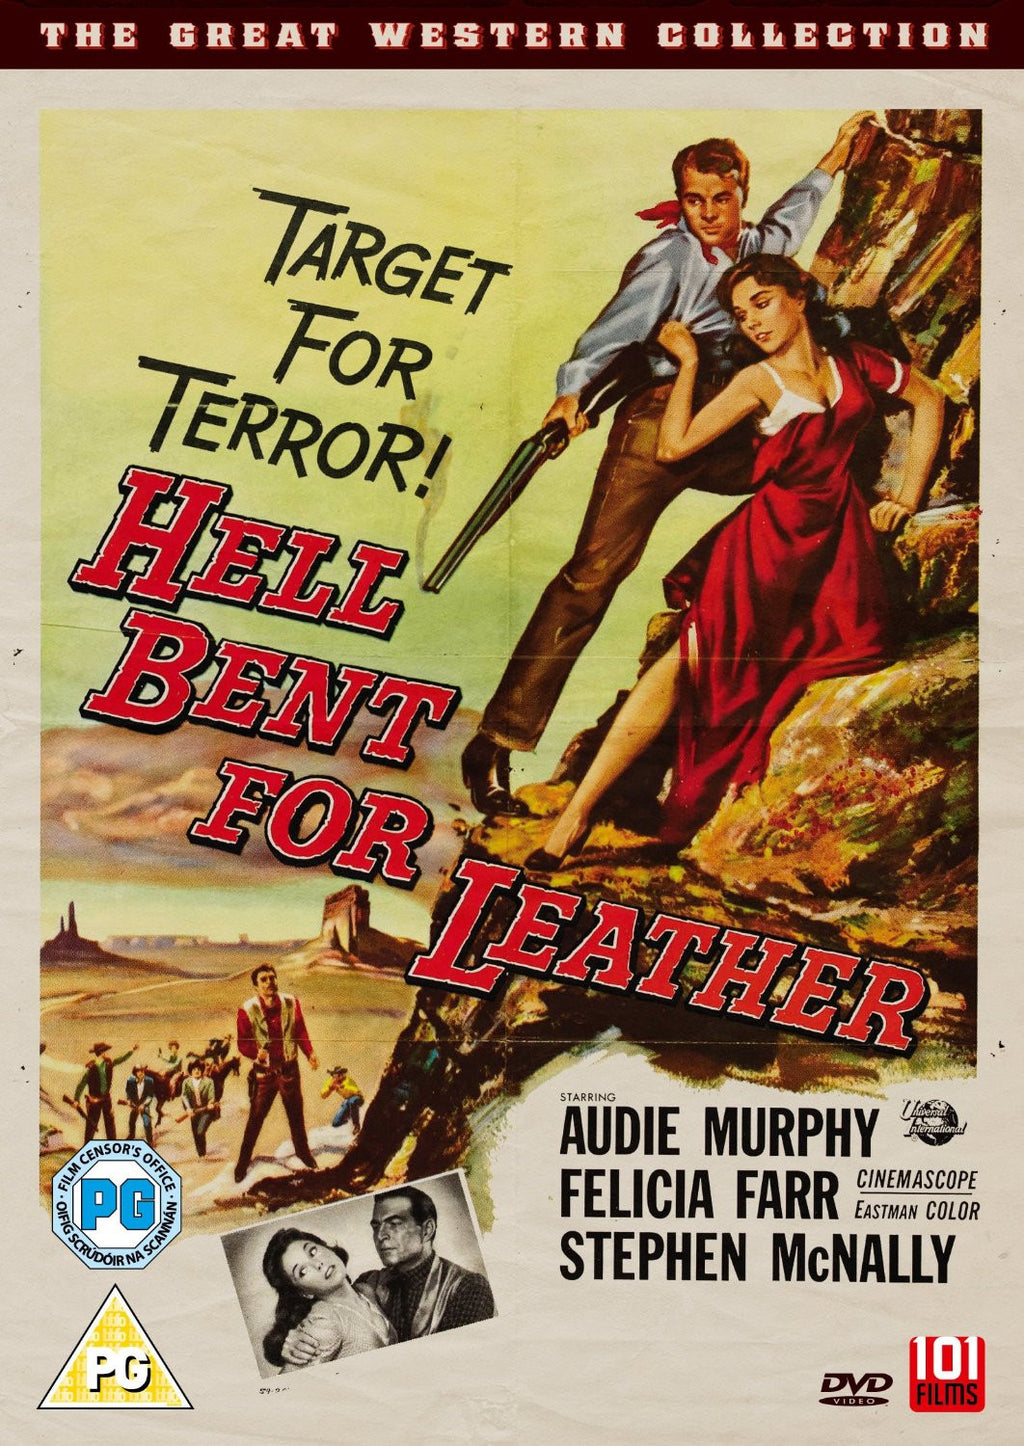 Hell Bent For Leather (1960) (DVD)